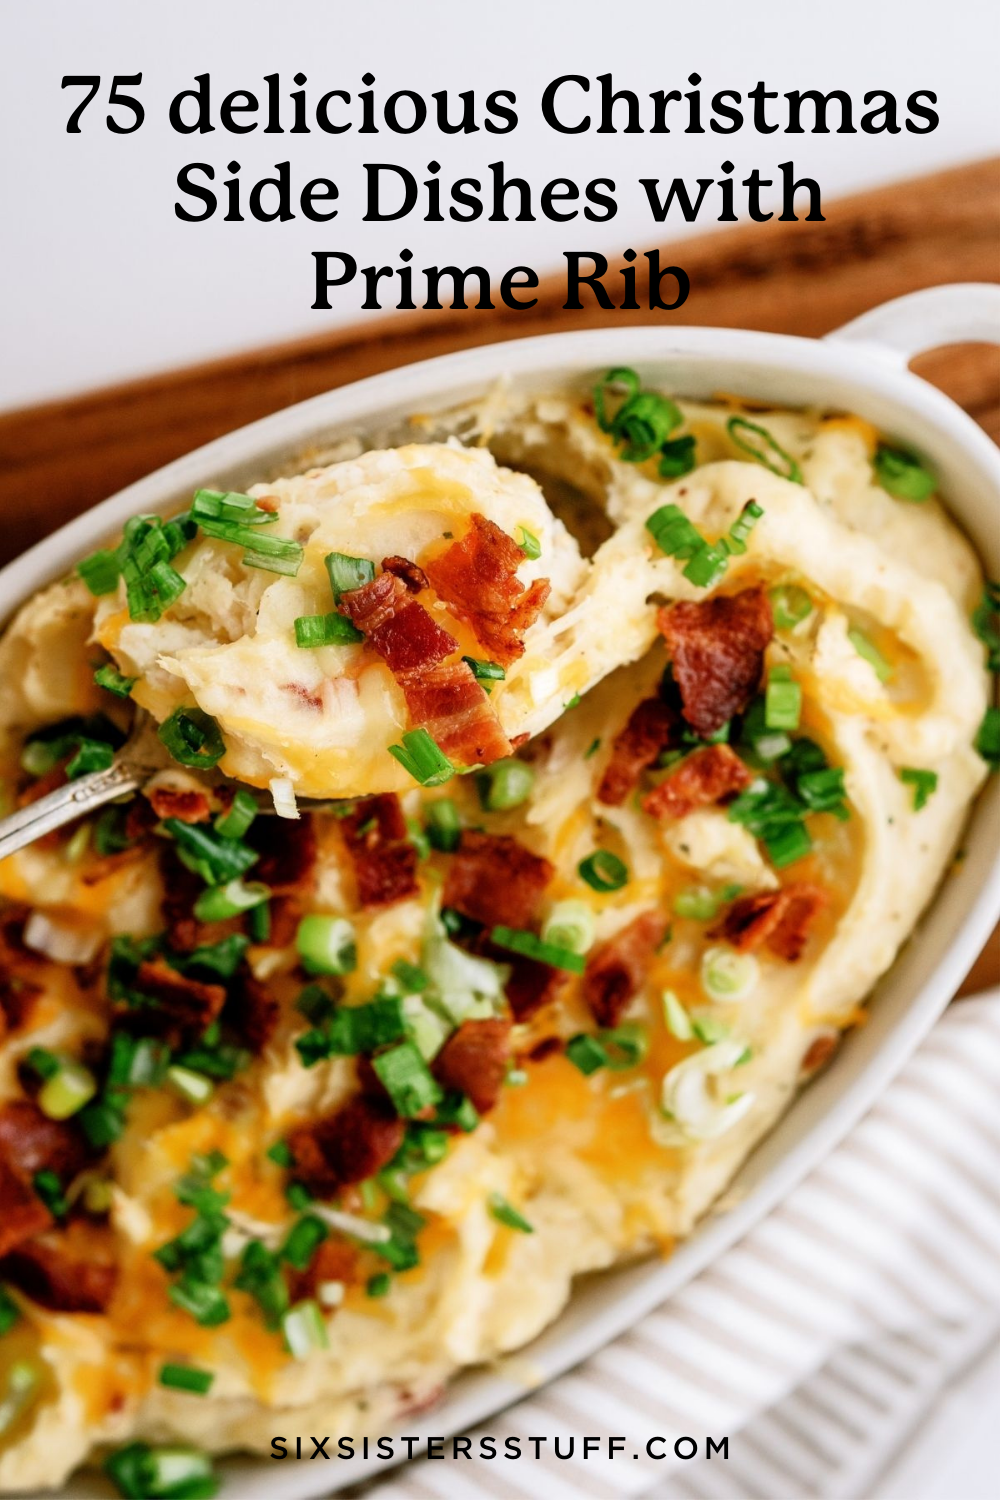 75 delicious Christmas Side Dishes with Prime Rib